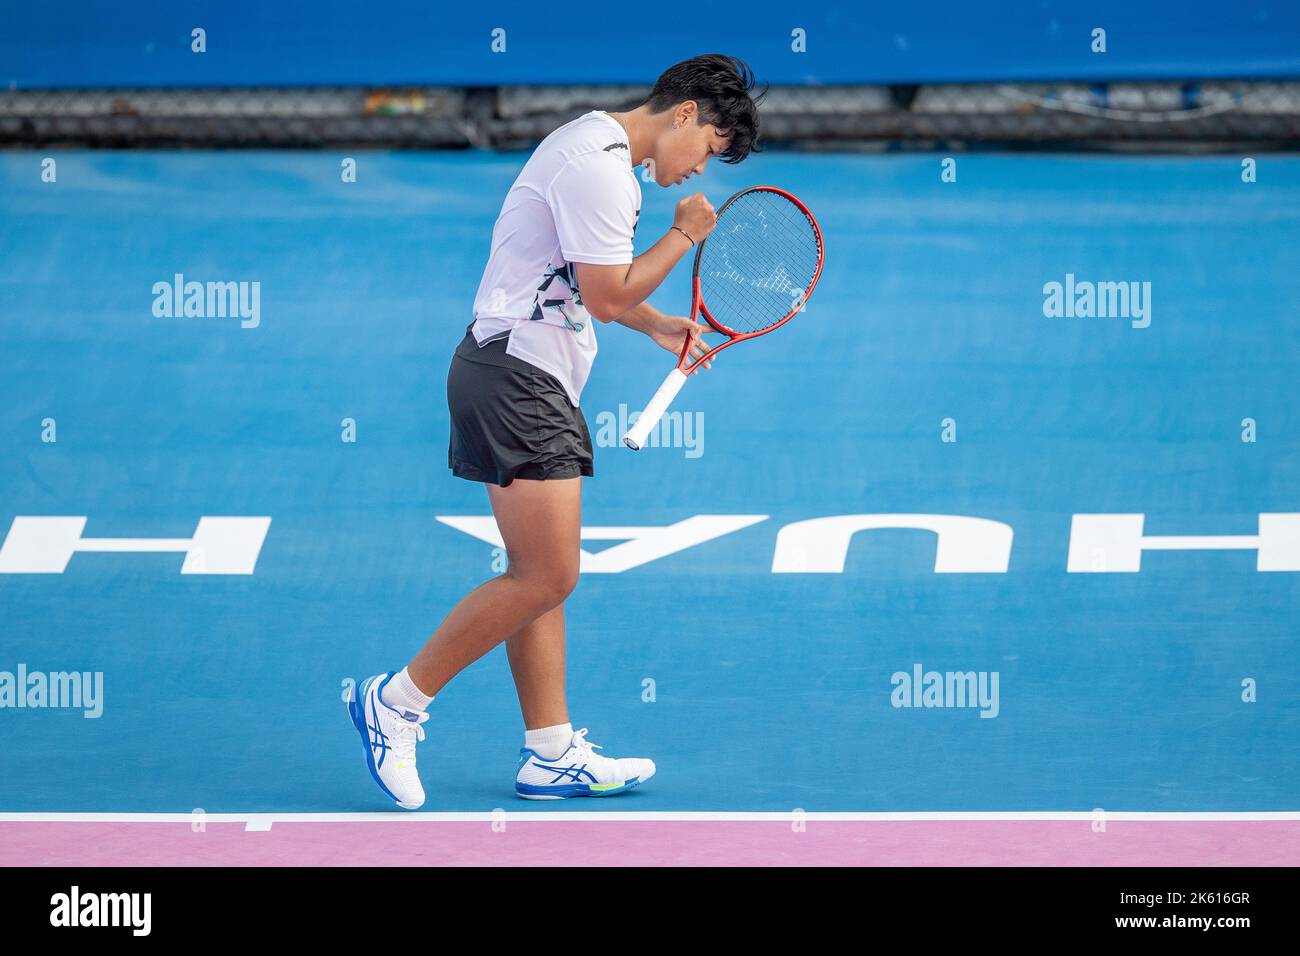 HUA HIN, THAILAND - OCTOBER 11:  Luksika Kumkhum from Thailand in the first round match against Zhibek Kulambayeva from Kazakhstan at the CAL-COMP & CCAU INDUSTRY 4.0 ITF TENNIS TOUR 2022 at True Arena Hua Hin on October 11, 2022 in HUA HIN, THAILAND (Photo by Peter van der Klooster/Alamy Live News) Stock Photo